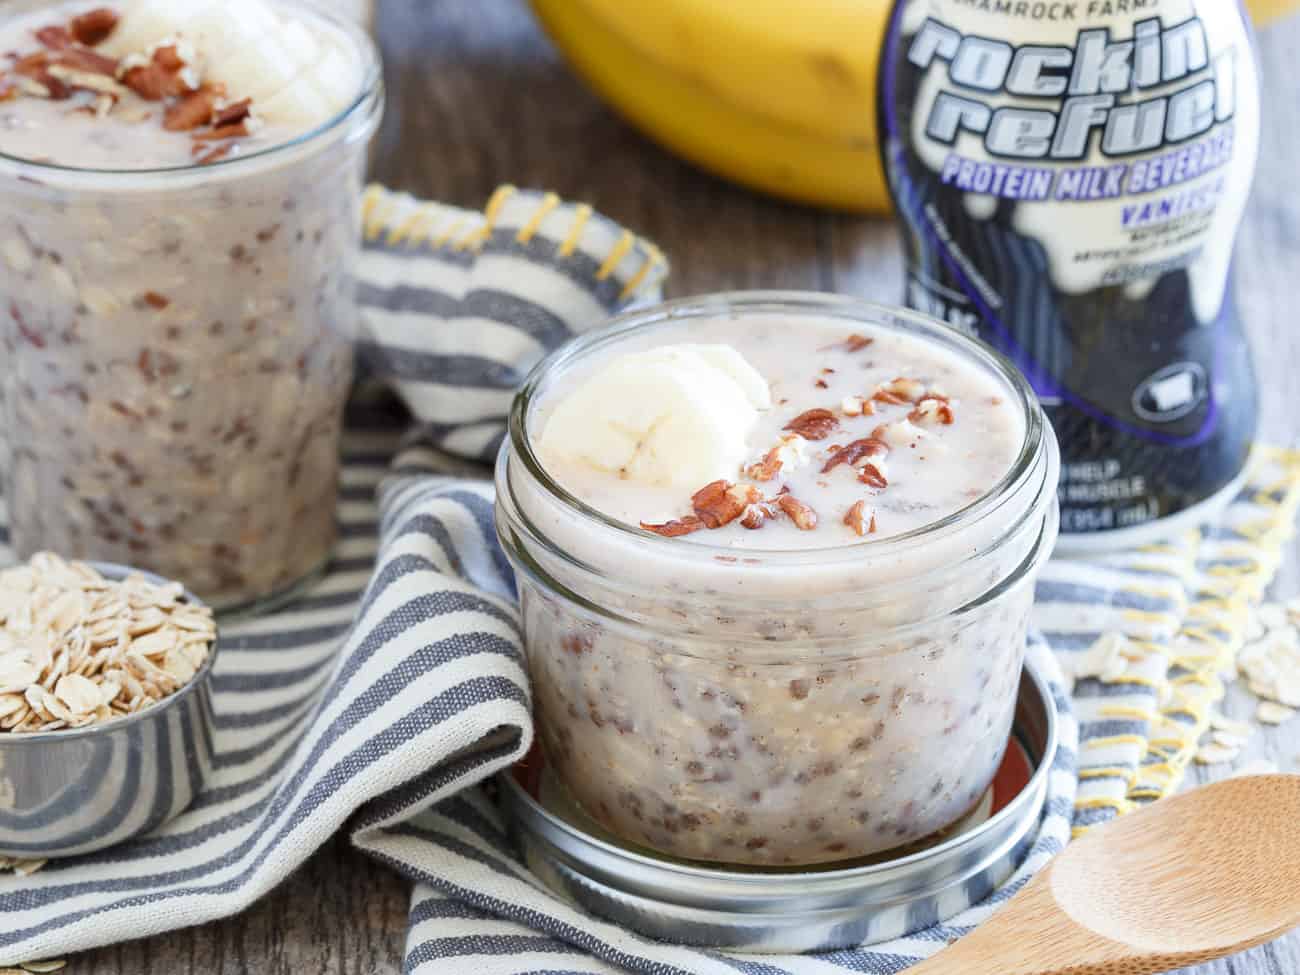 Overnight oats are the perfect breakfast for those on the go. This version is protein packed to help keep you full longer!